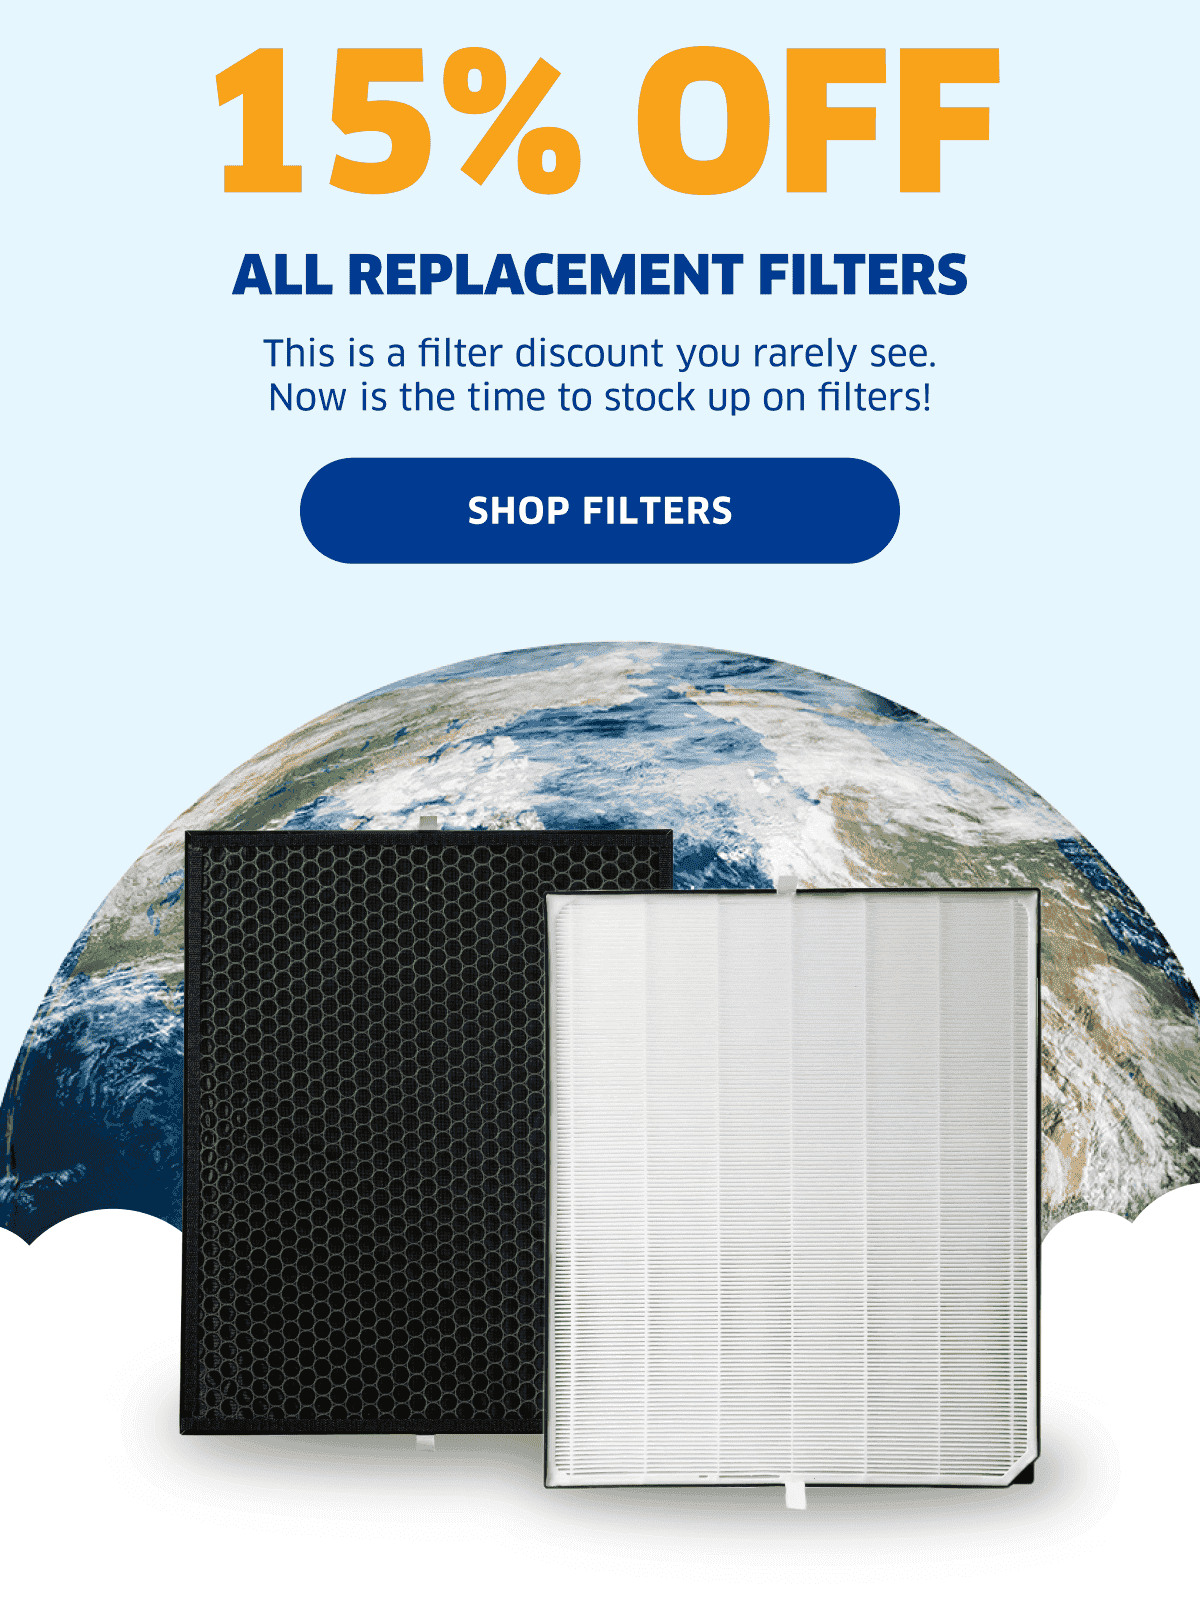 15% Off All Replacement Filters | Shop Filters